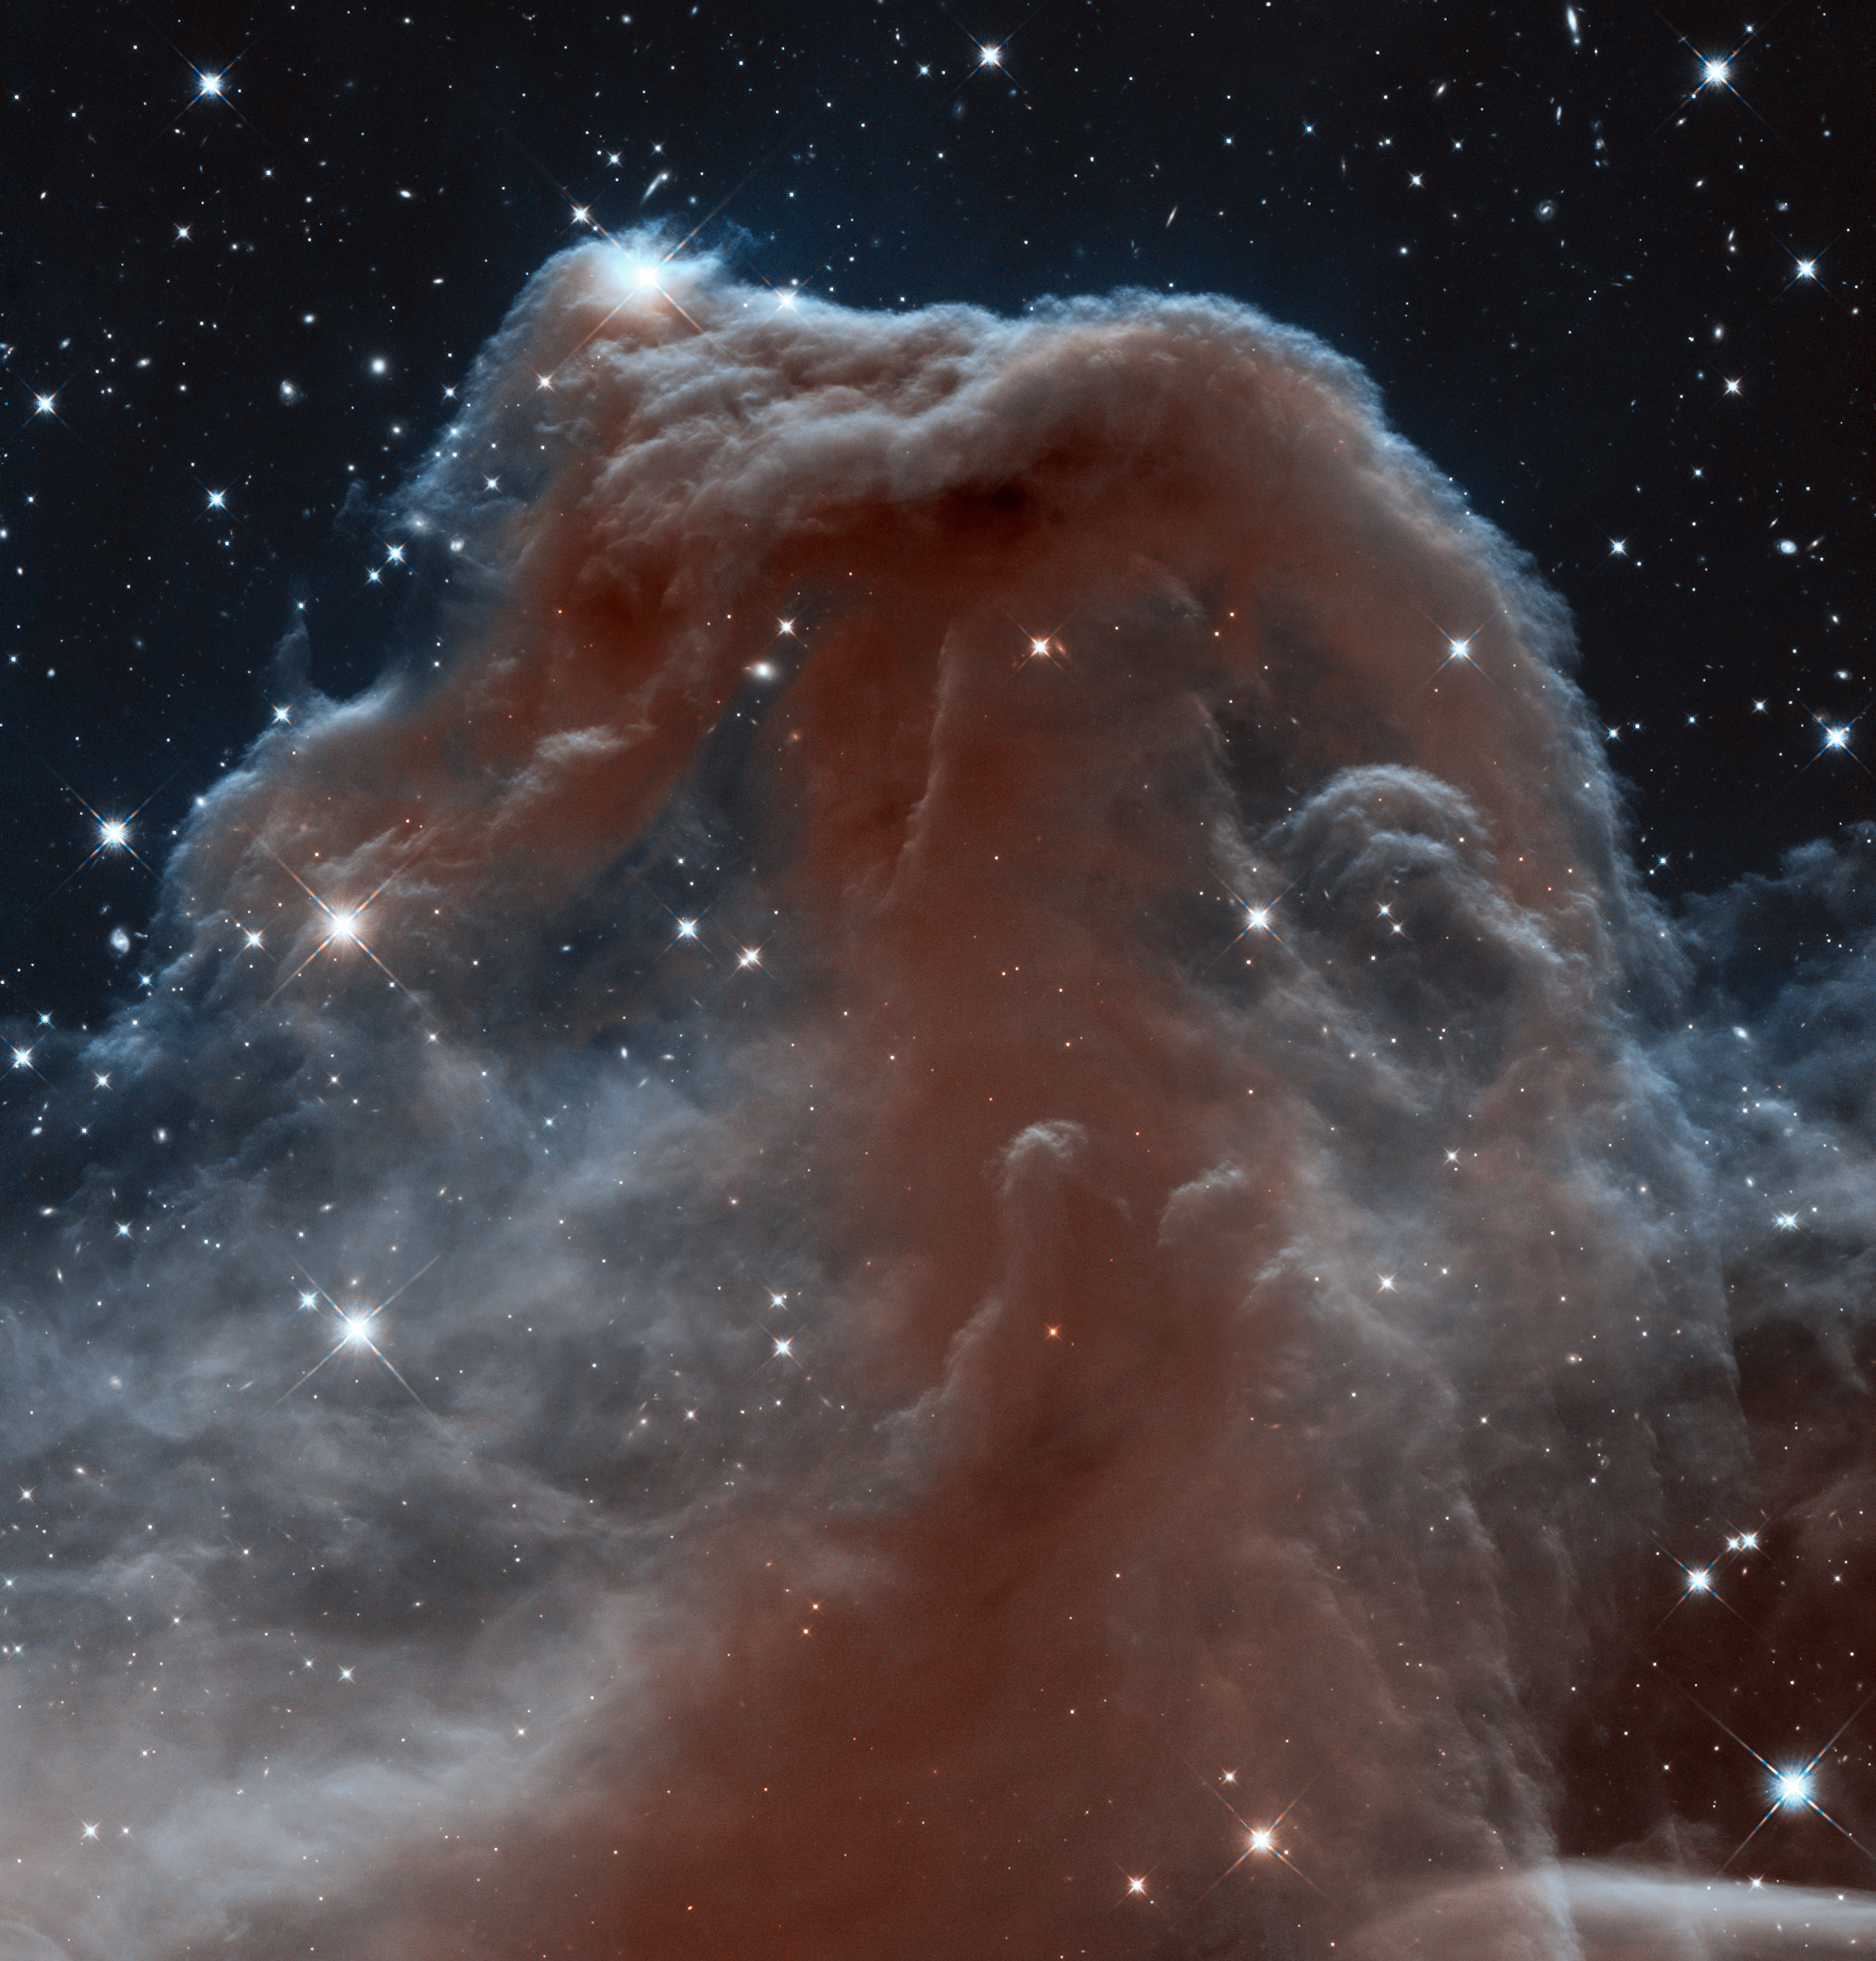 Hubble Captured The Horsehead Nebula, 1990; Astronomers used NASA's Hubble Space Telescope to photograph the iconic Horsehead Nebula in an infrared light to mark the 23rd anniversary of the famous observatory's launch aboard the space shuttle Discovery on April 24, 1990.